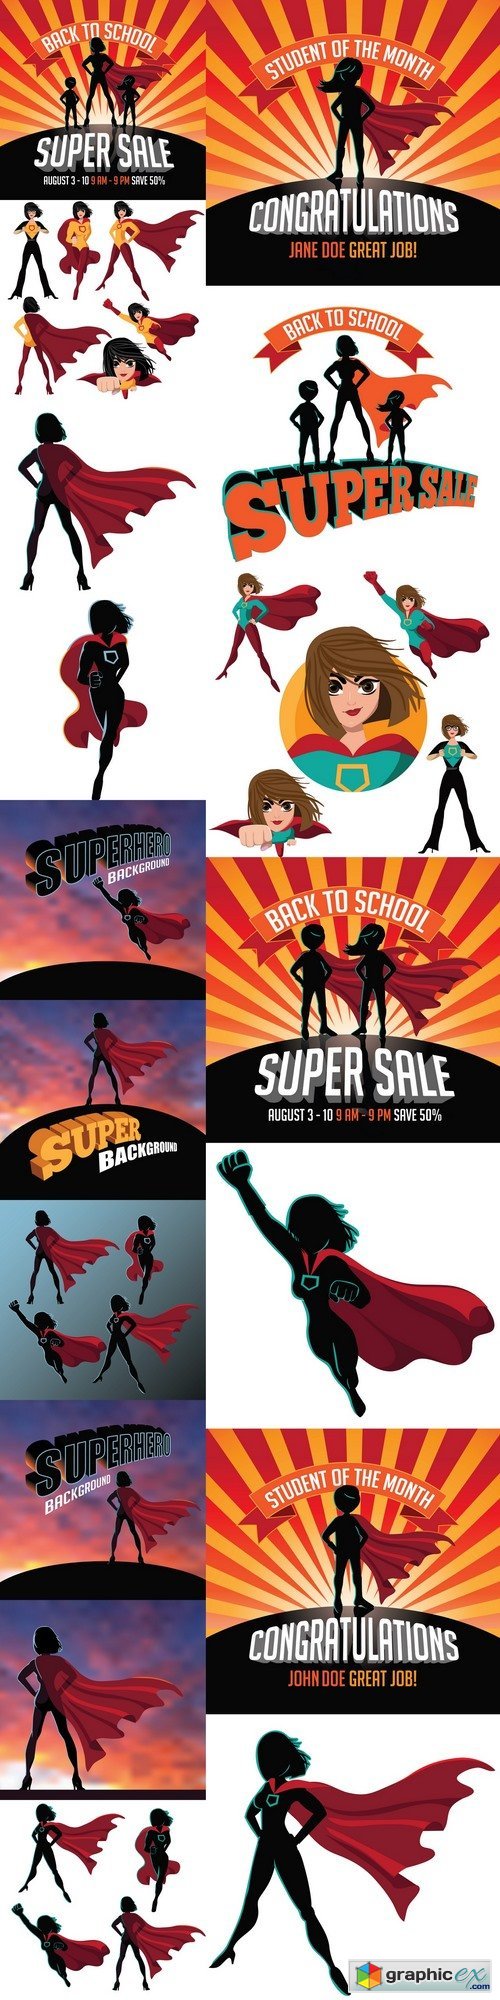 Superhero woman silhouette sunrise or sunset background with copy space